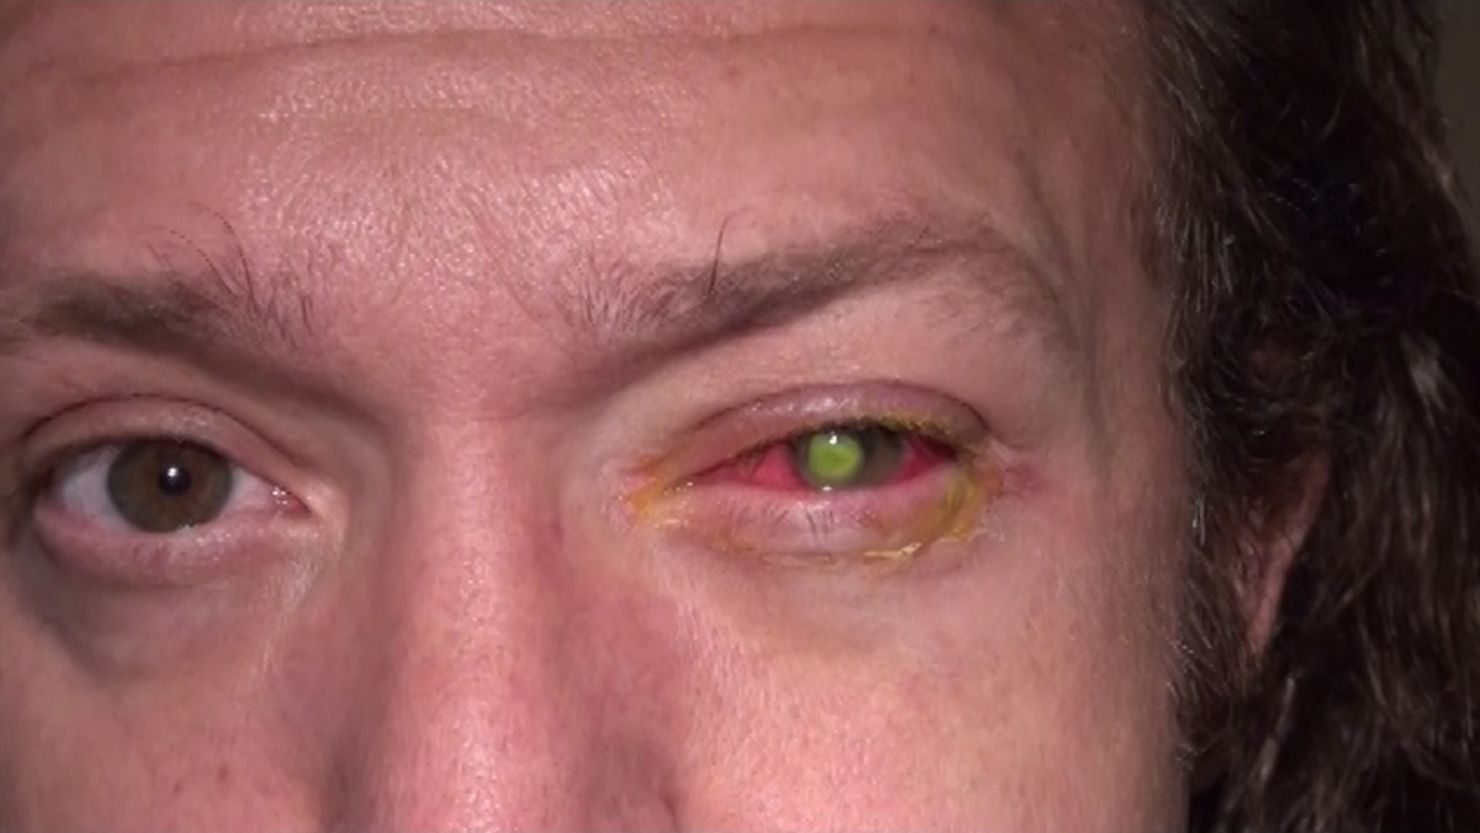 Chad Groeschen developed a dangerous bacterial infection in his left eye after sleeping in contact lenses. 